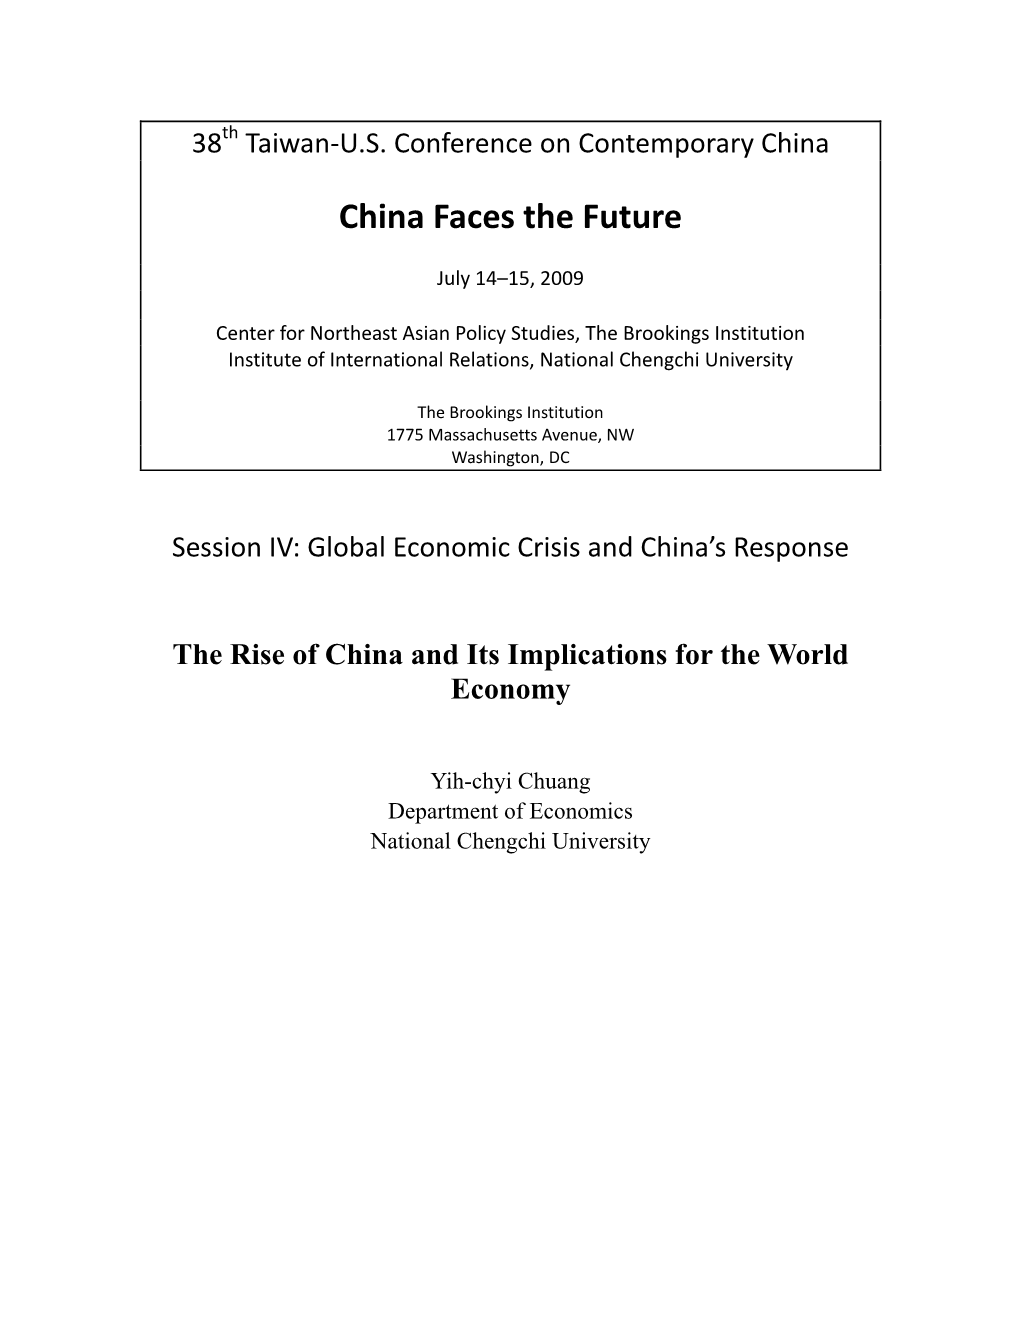 Read a Panel IV Paper by Yih-Chyi Chuang